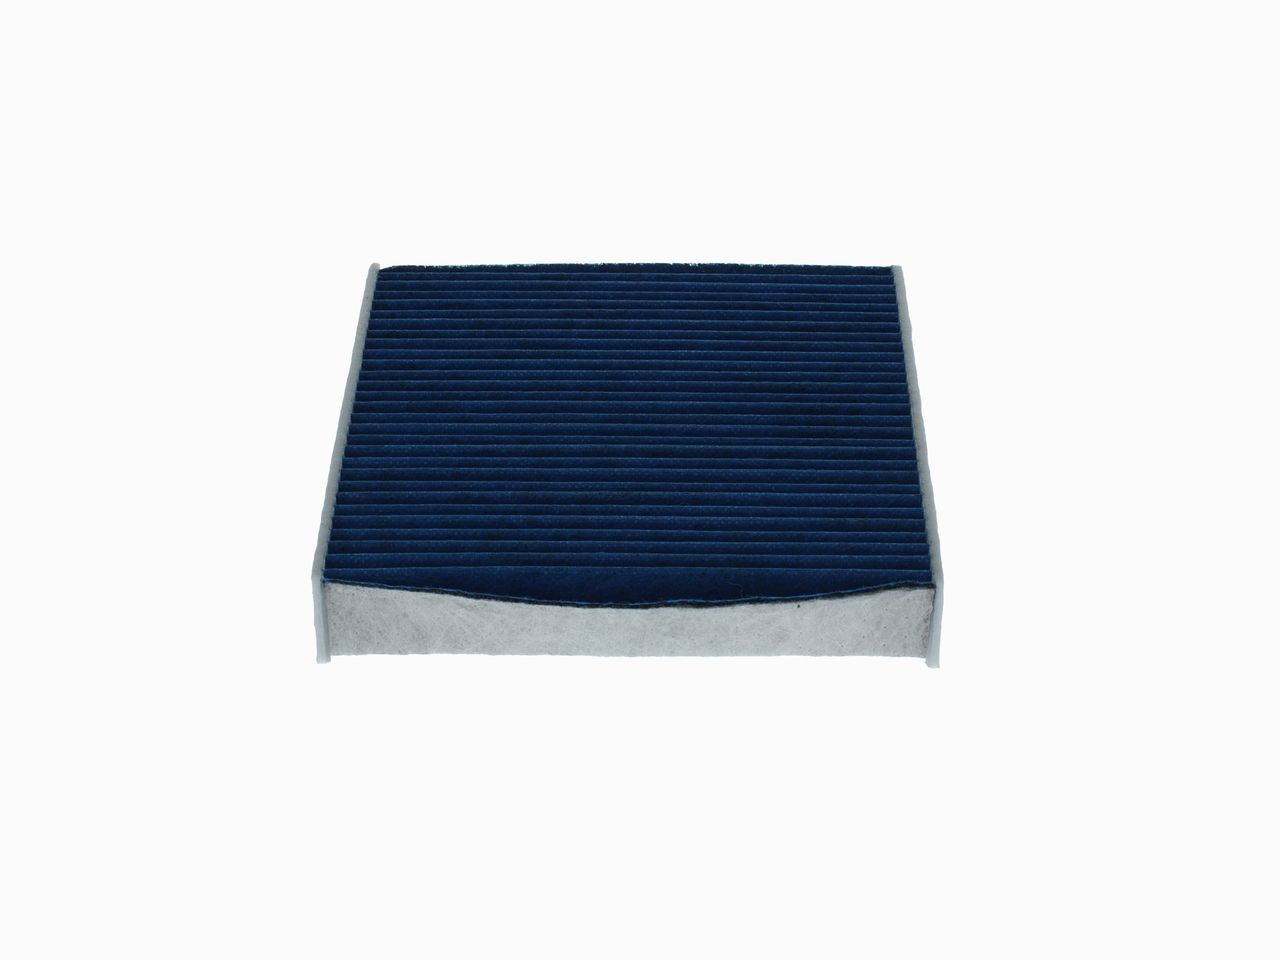 0986628636 Air con filter A 8636 BOSCH Activated Carbon Filter, with antibacterial action, Particle Separation Rate >98% for 2.5µm (fine matter), with anti-allergic effect, with antiviral effect, with fungicidal effect, 232 mm x 209 mm x 35 mm